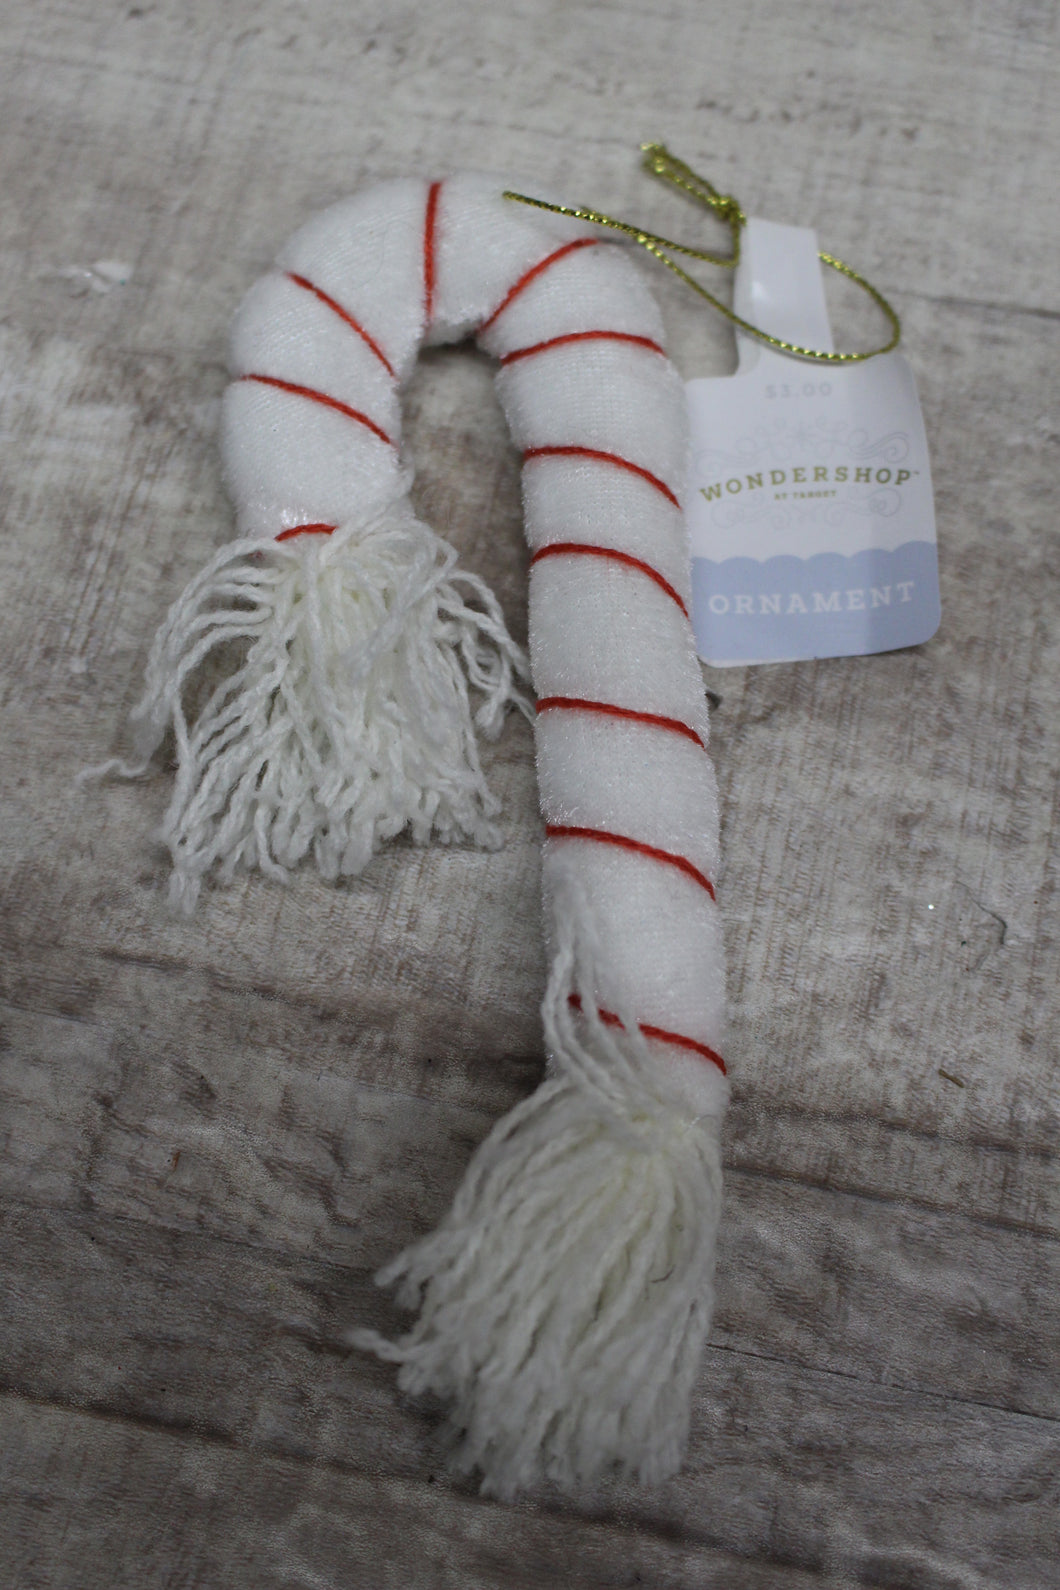 Wondershop By Target Soft White Candy Cane Ornament -New